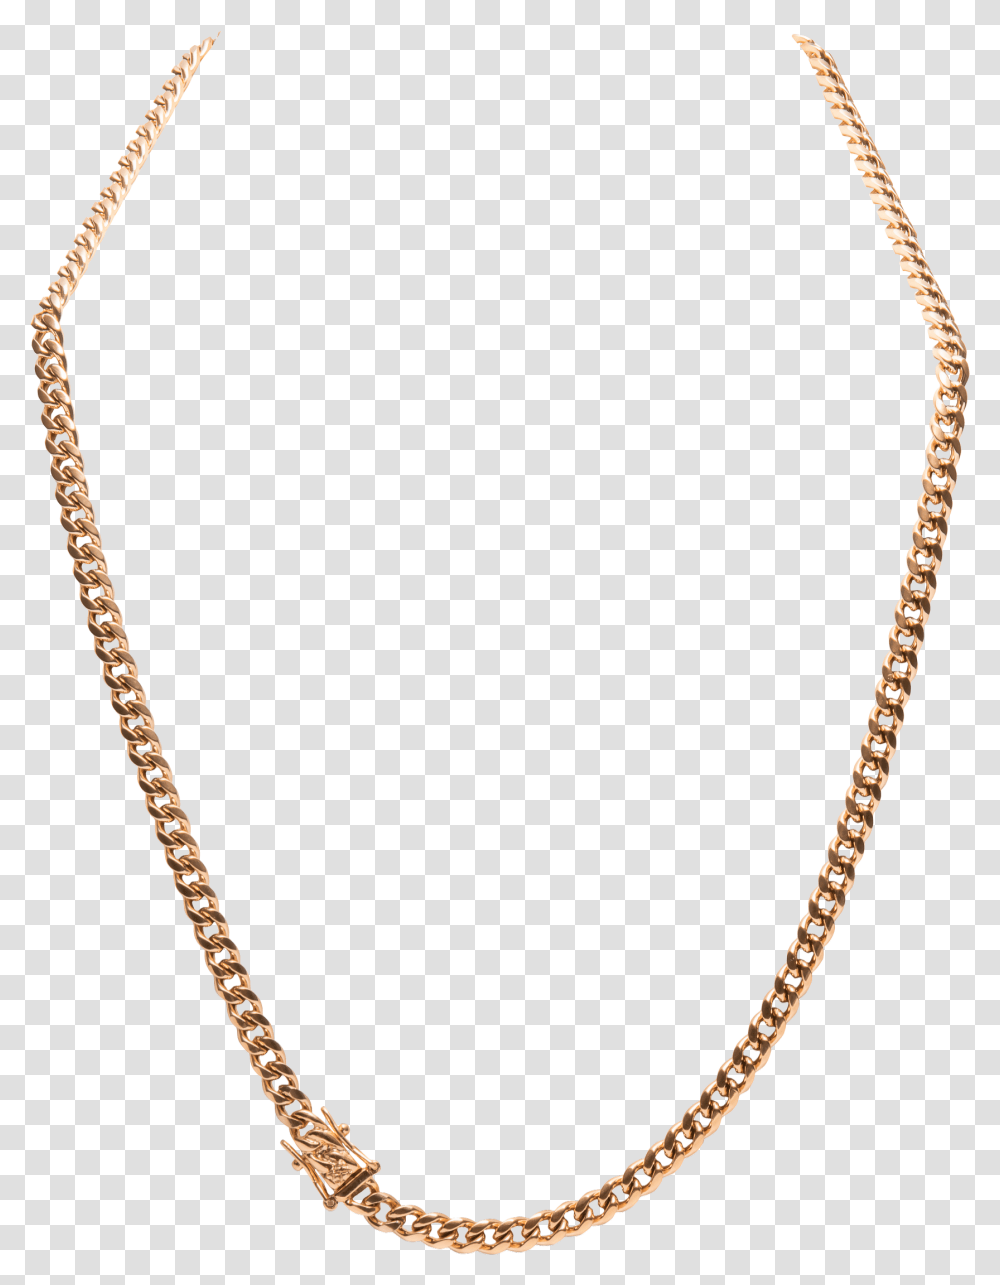 Pn Gadgil Gold Chain Designs For Men, Necklace, Jewelry, Accessories, Accessory Transparent Png